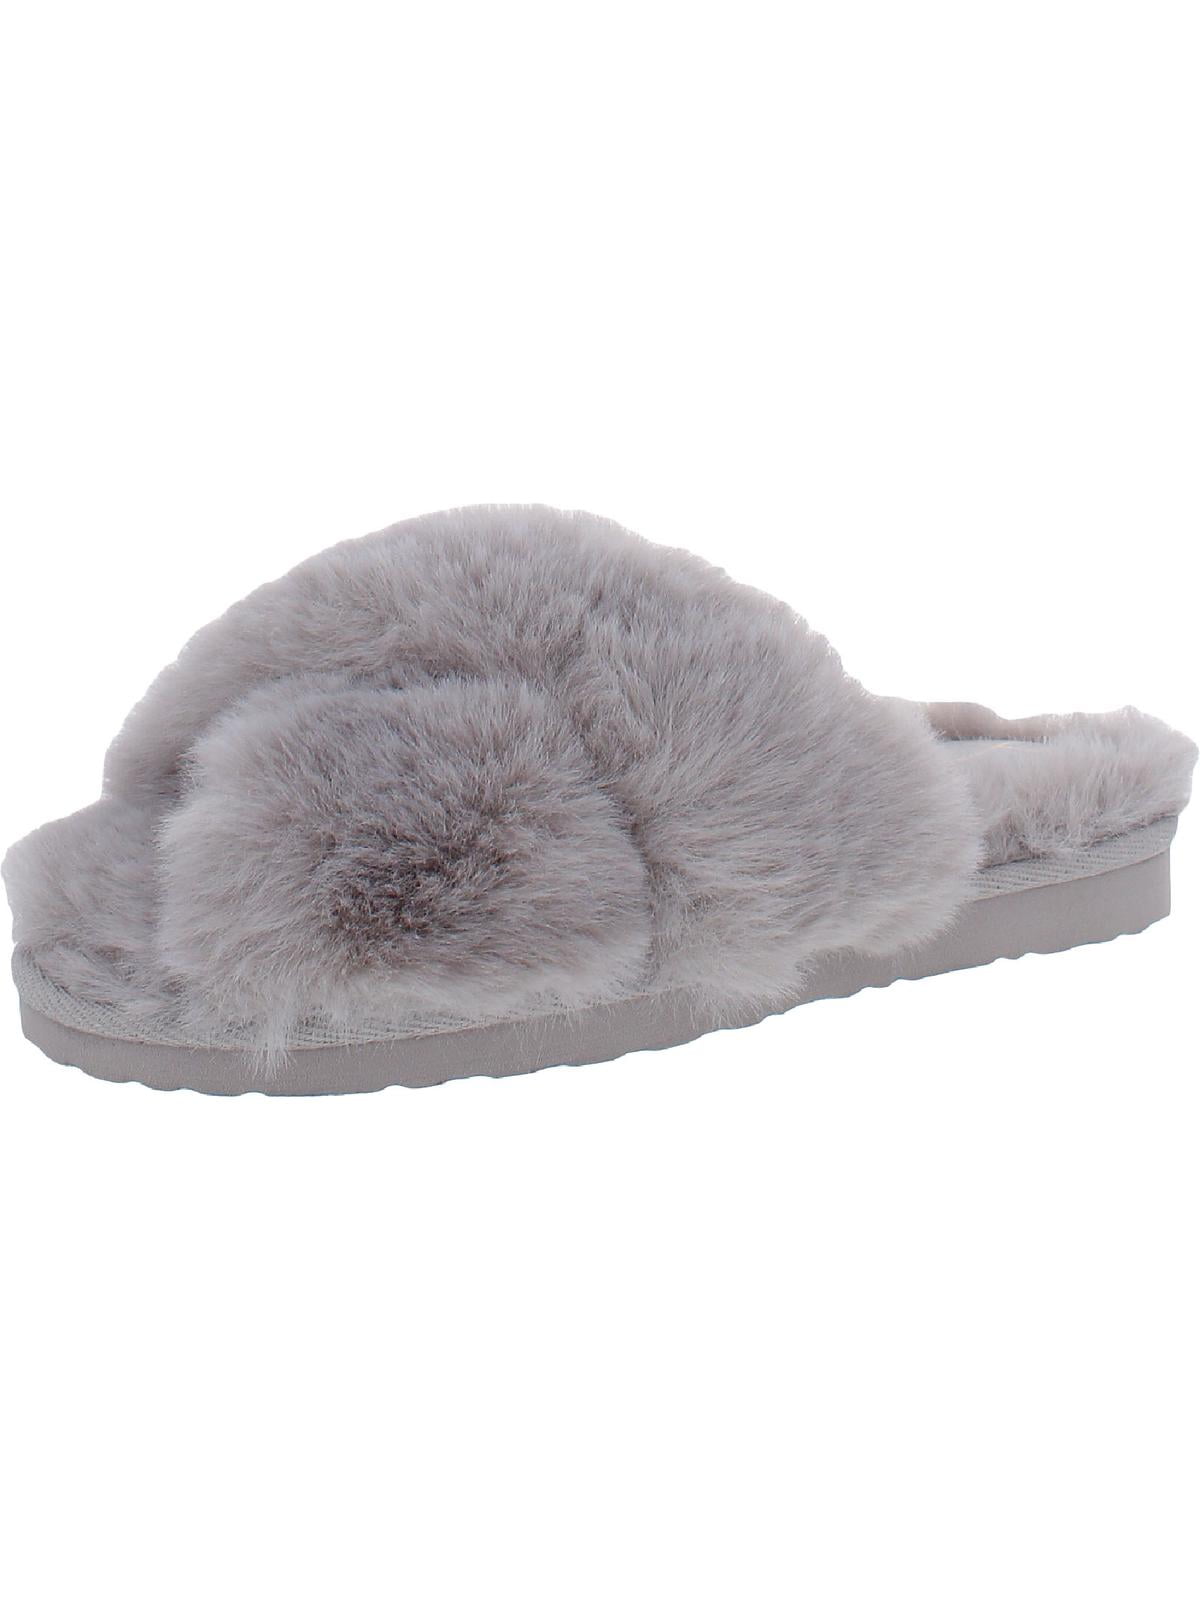 Bergman Kelly Women's Fuzzy Faux Fur Slide Slippers, Starlet Collection -  Scuff Style (US Company) 